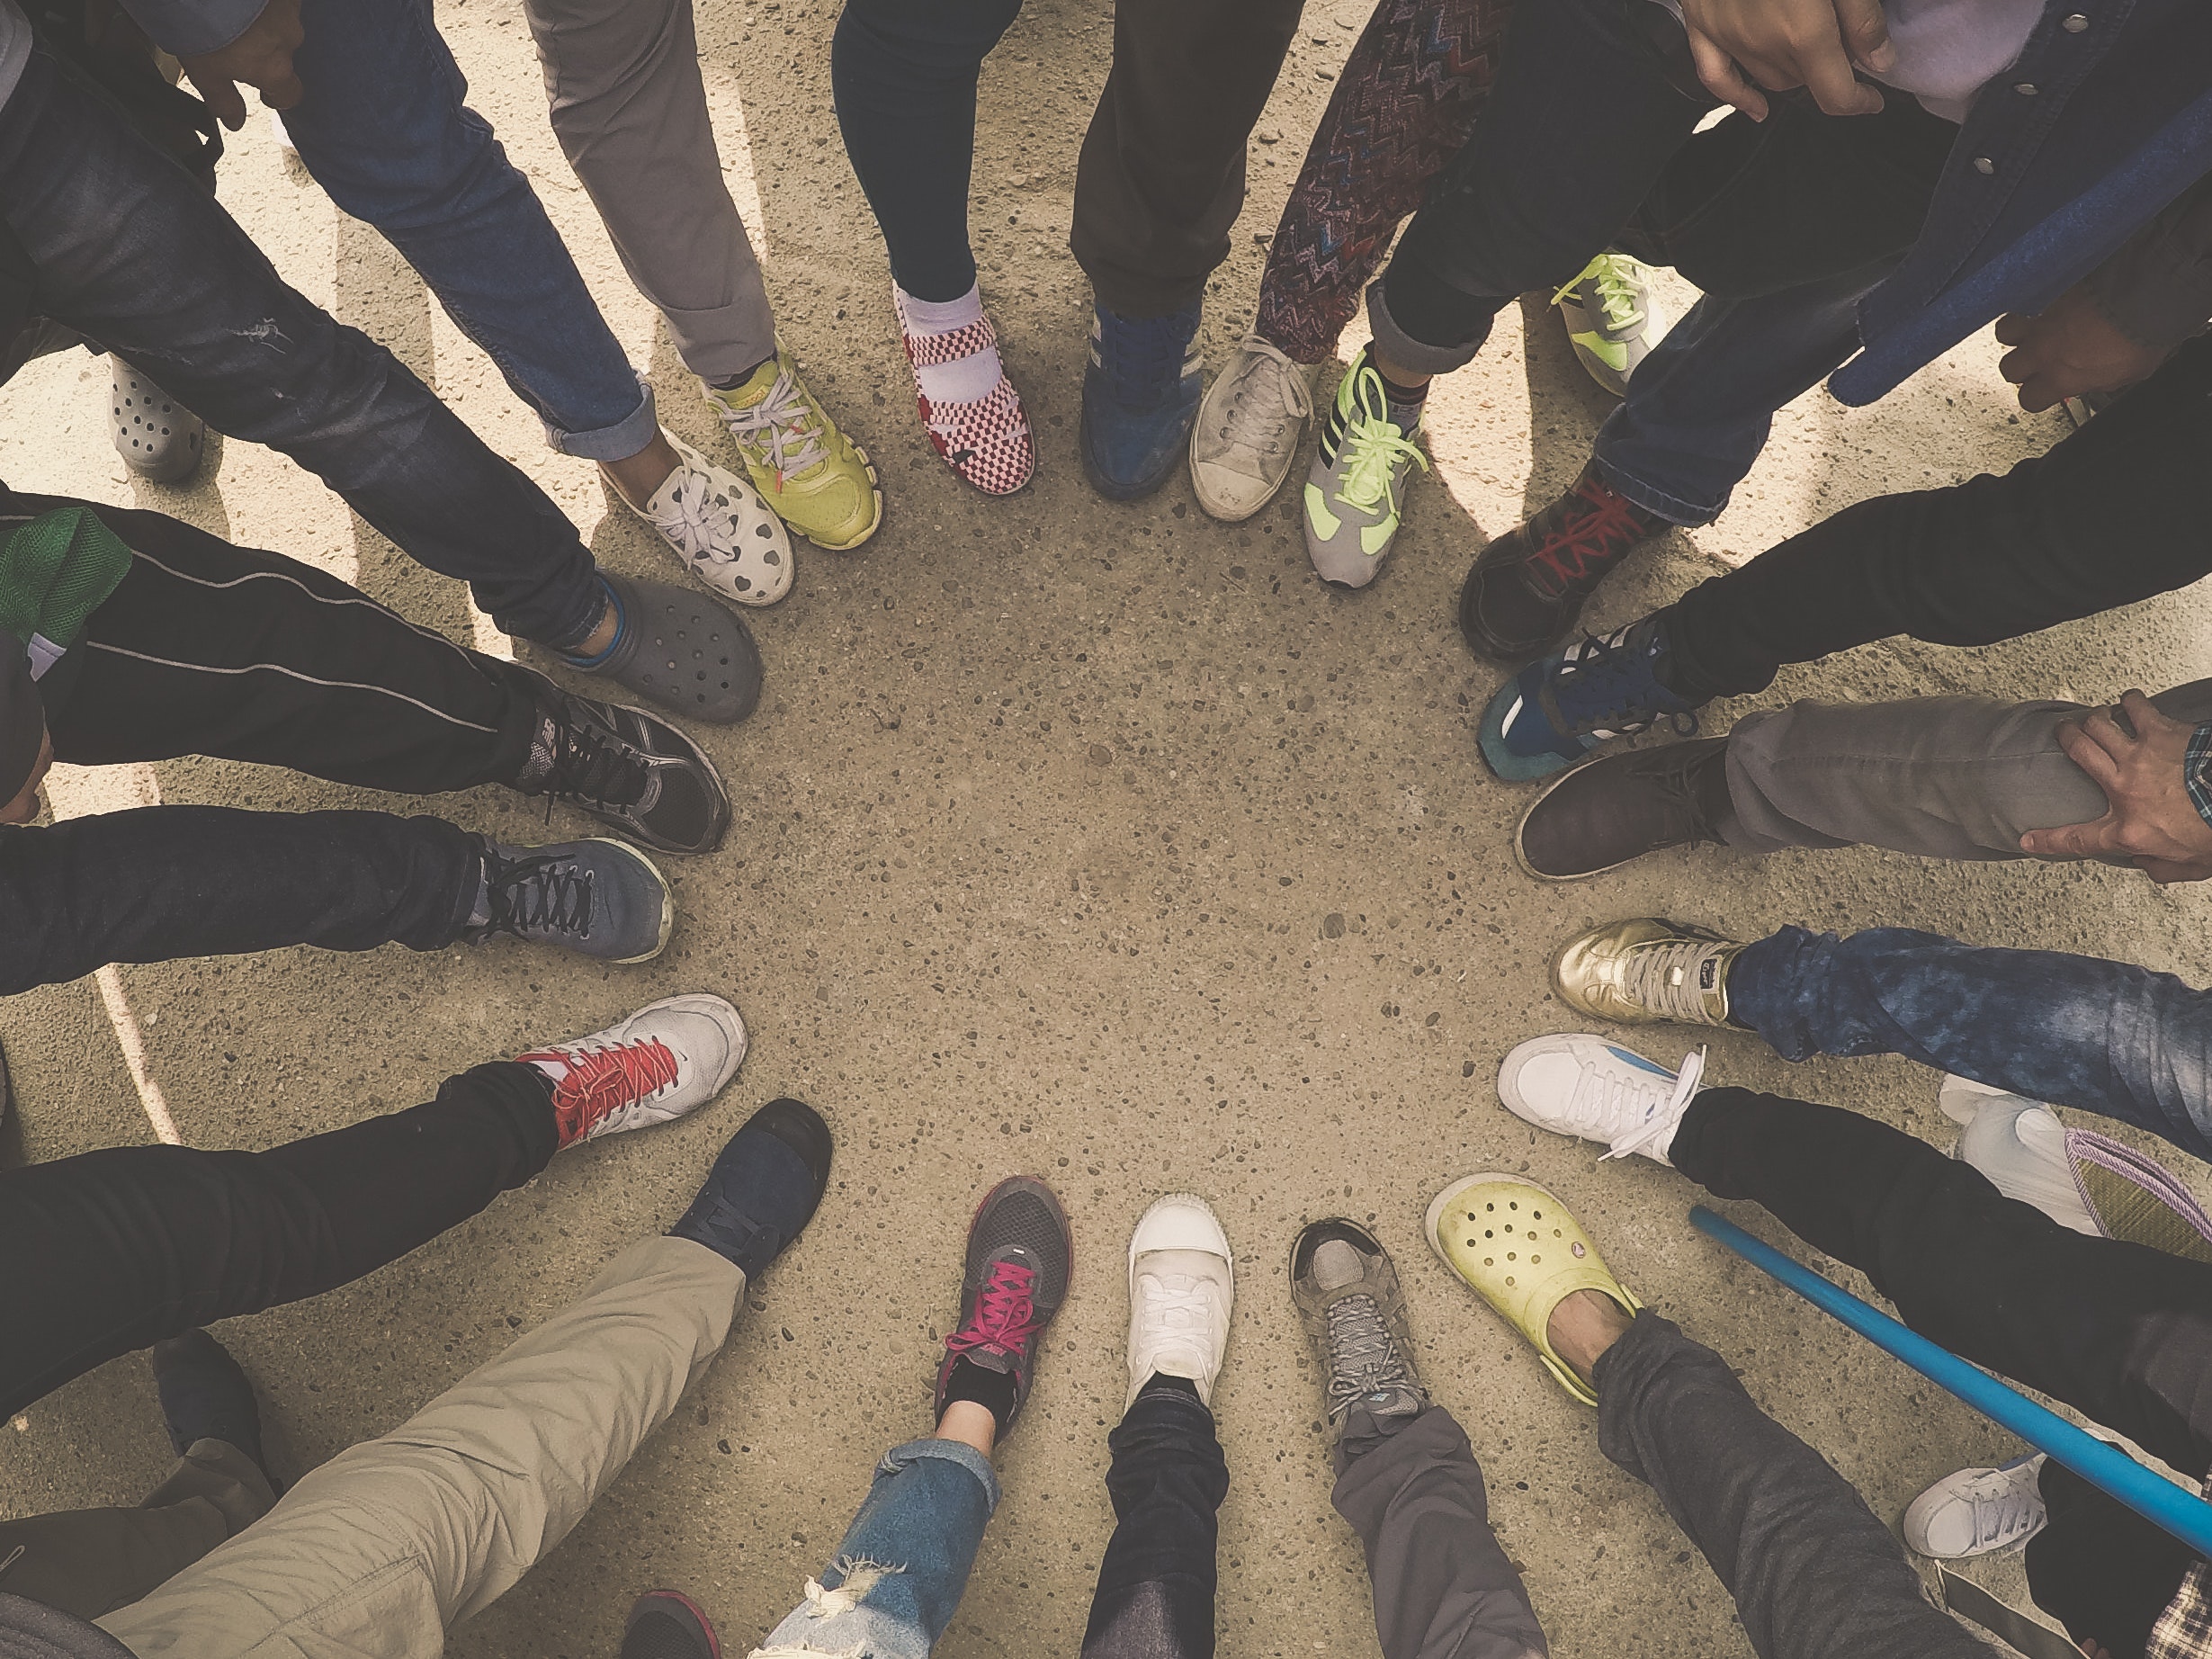 How we can work together to create a truly inclusive church community